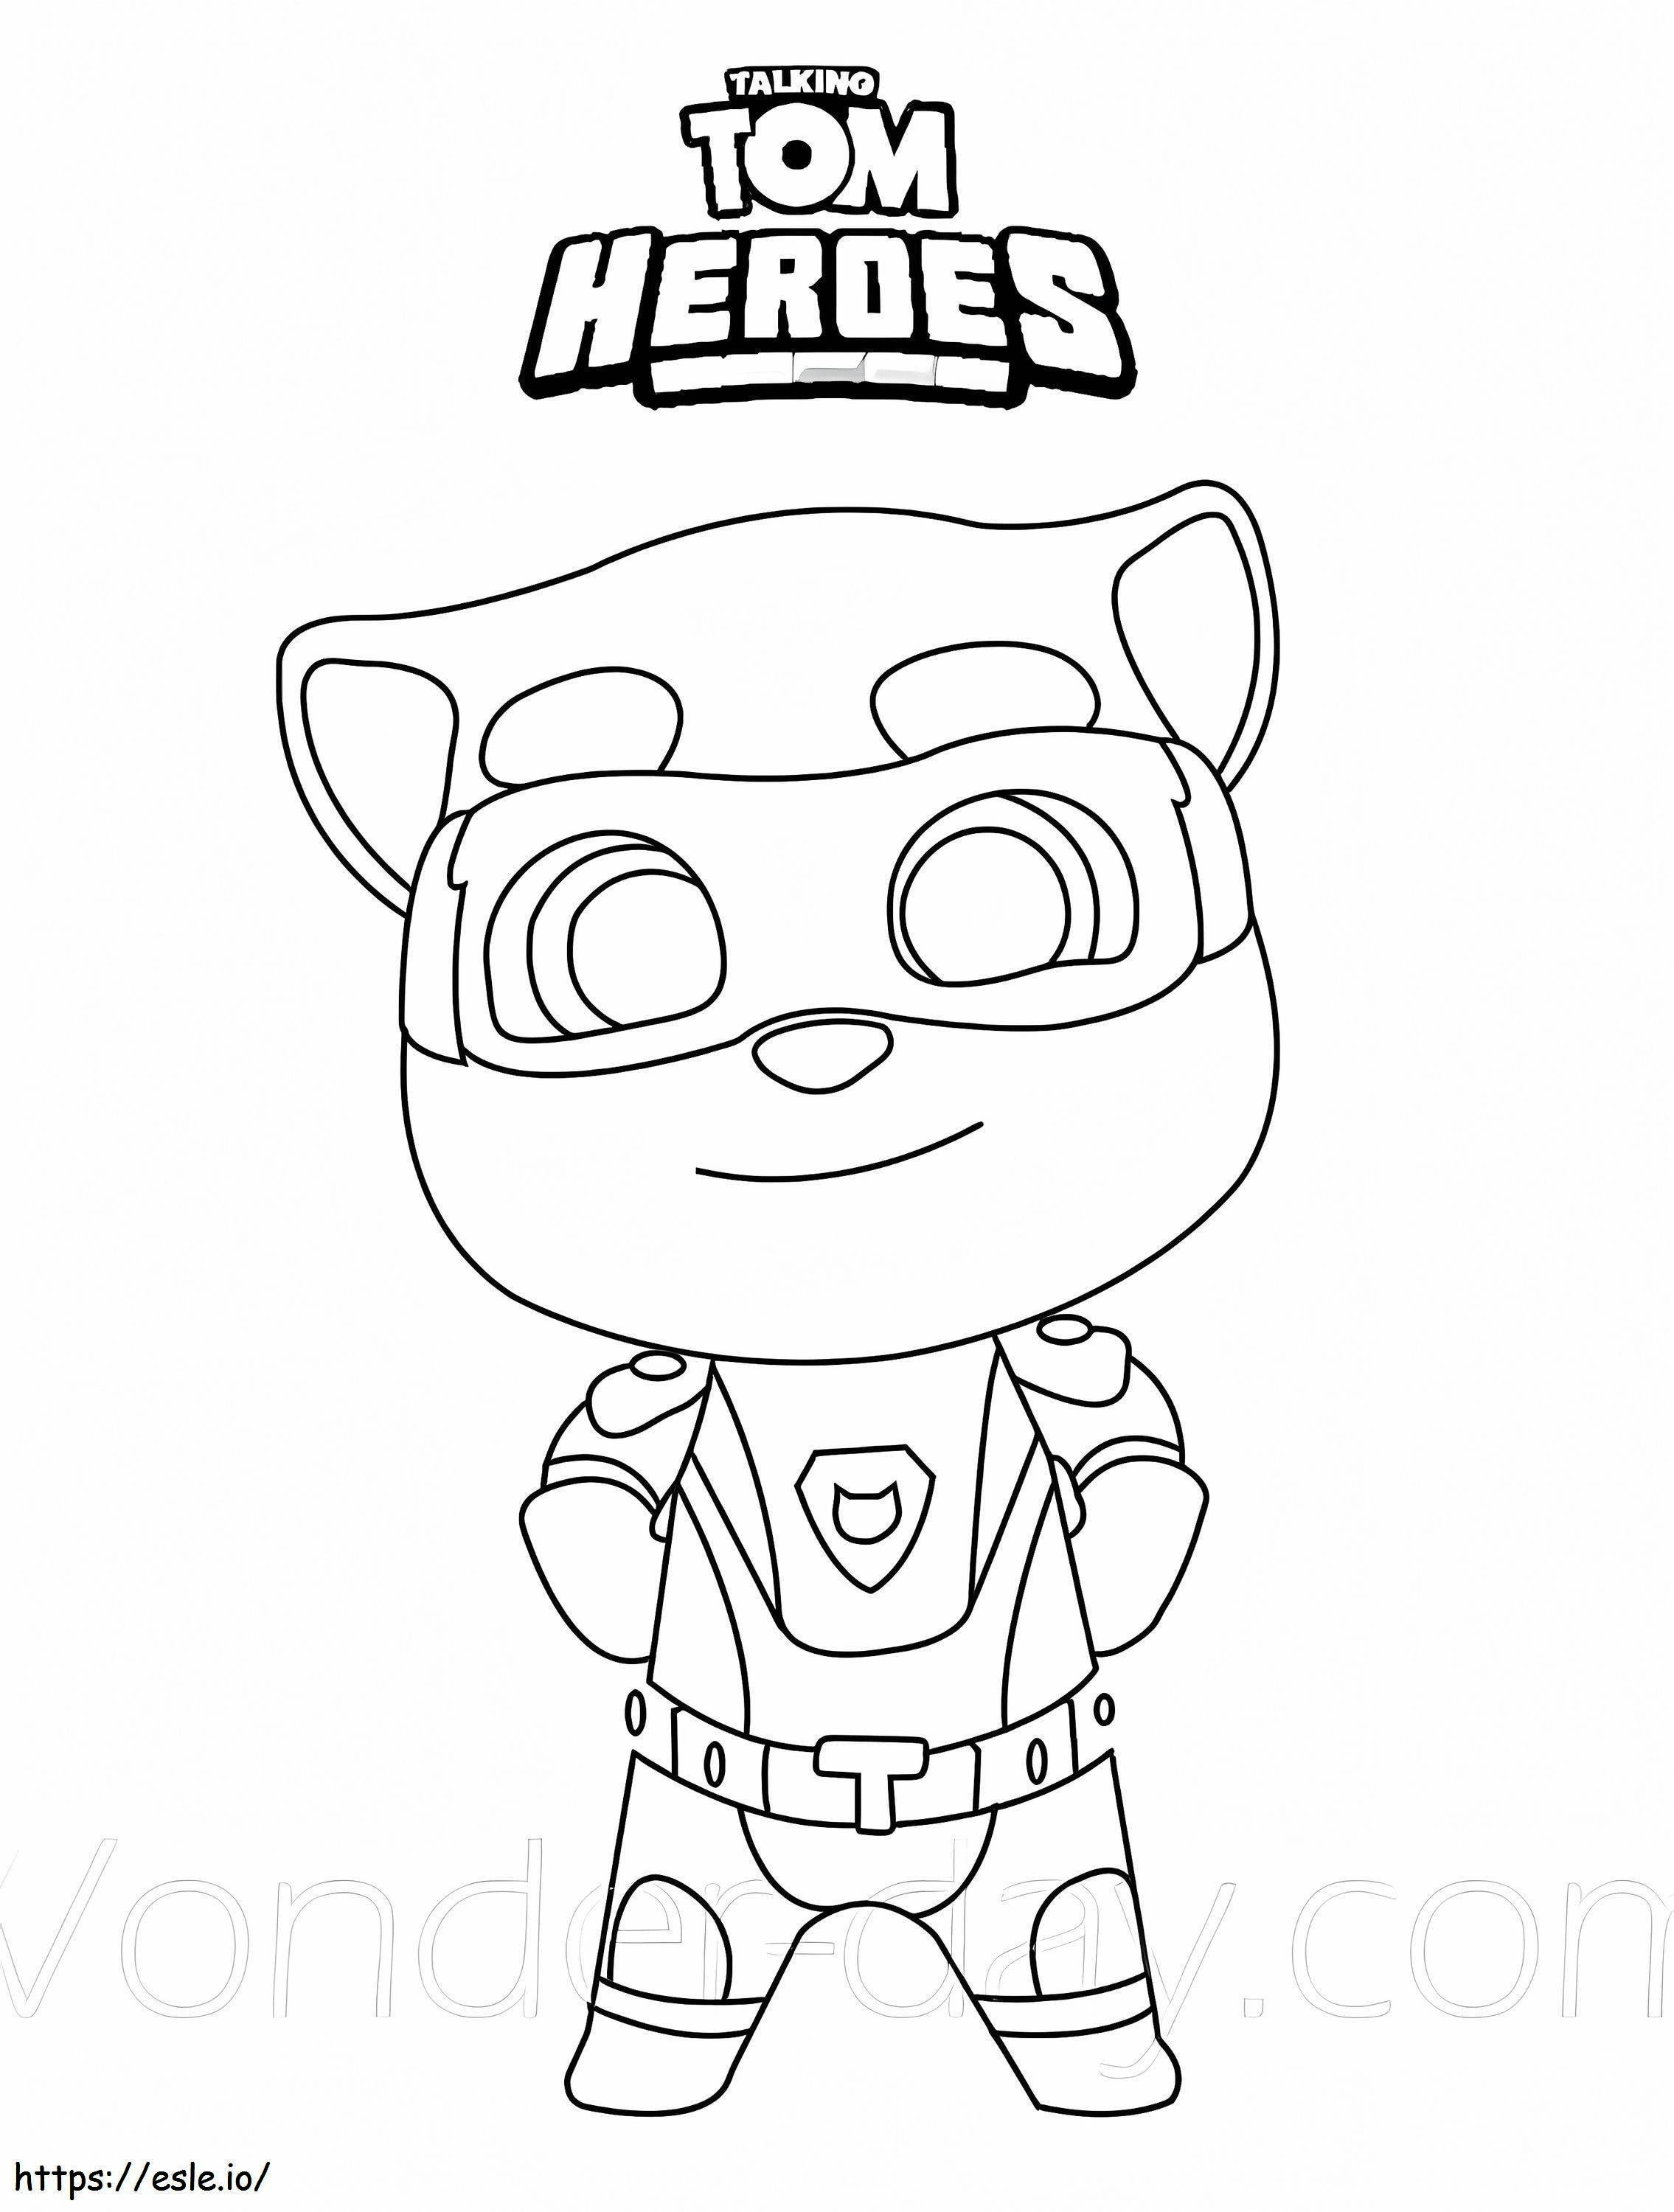 Tom Hero coloring page